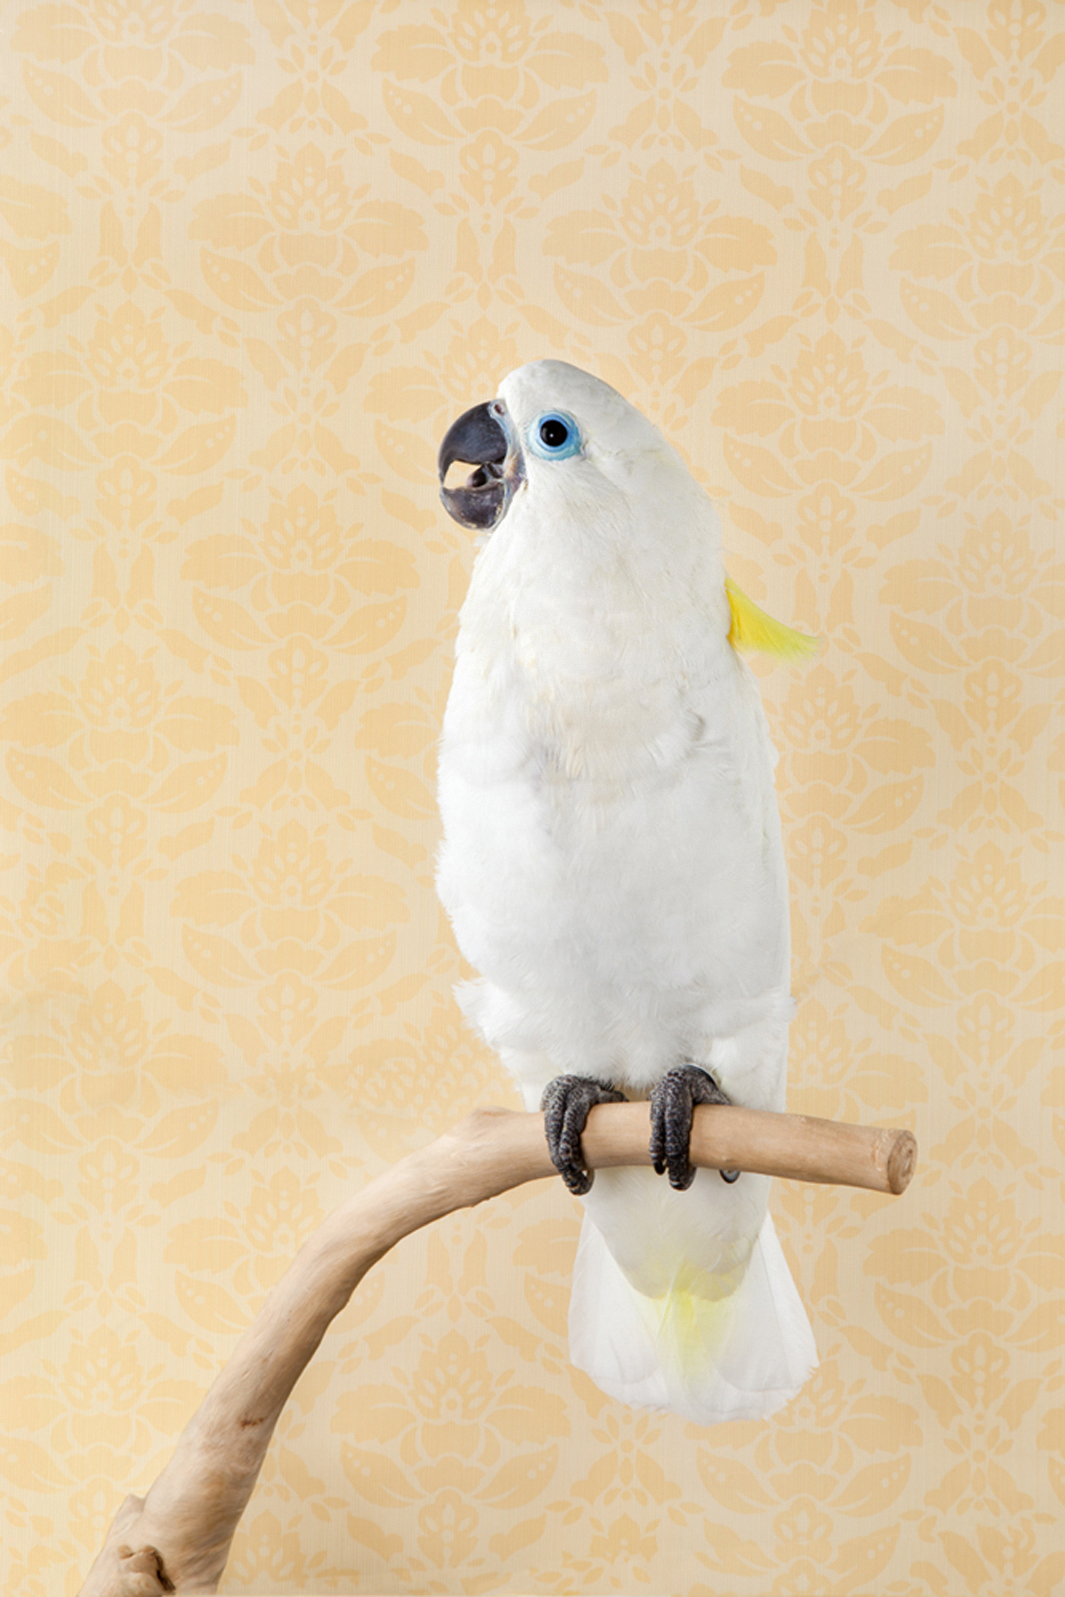 Claire Rosen | Blue Eyed Triton Cockatoo in front of a Vintage Wallpaper